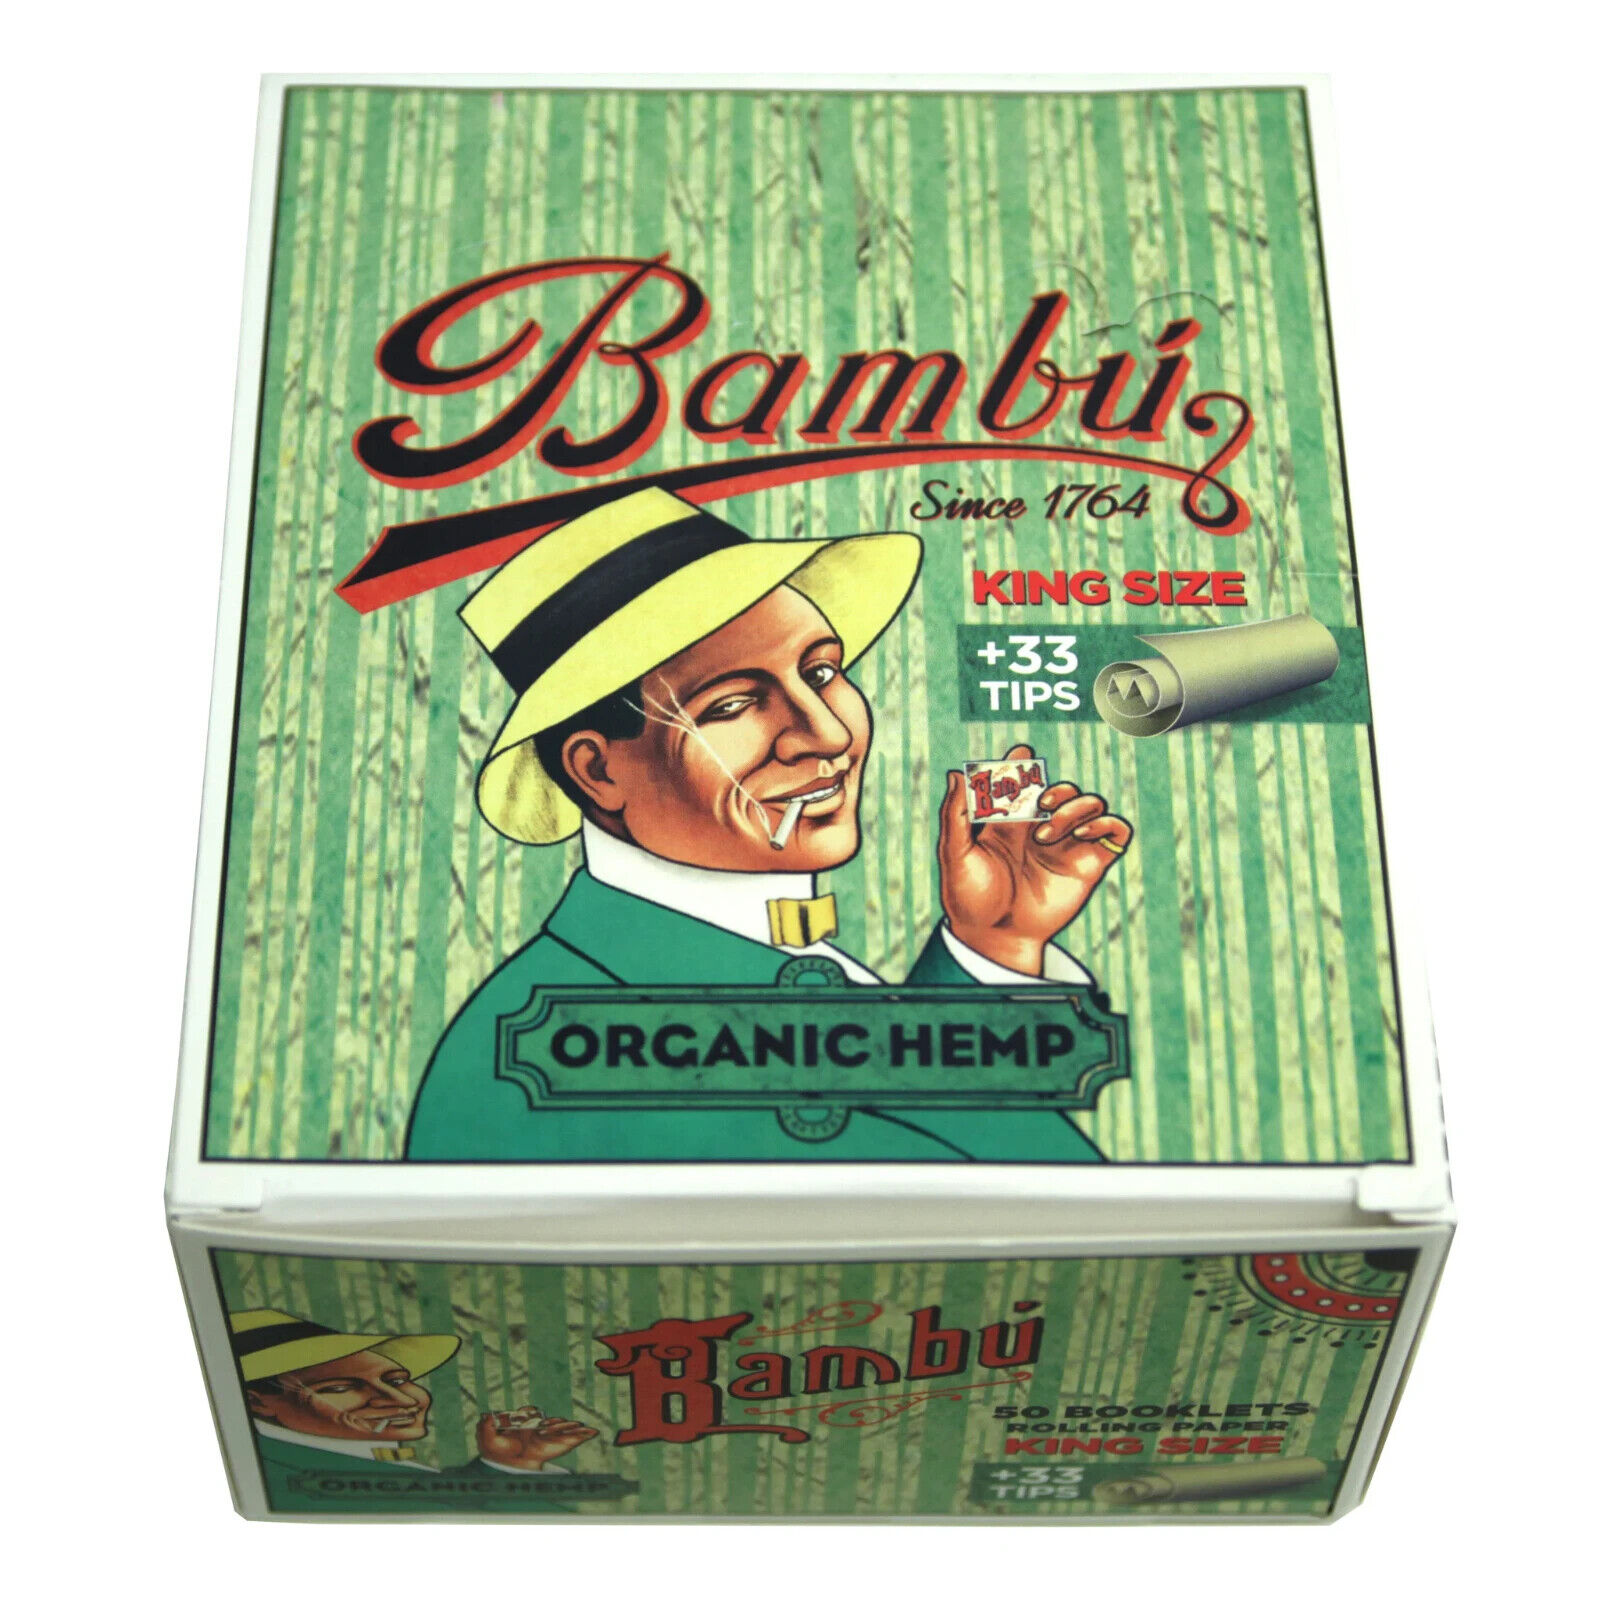 Bambu Organic Hemp with +33 Tips King Size Rolling Papers, 50 Booklets